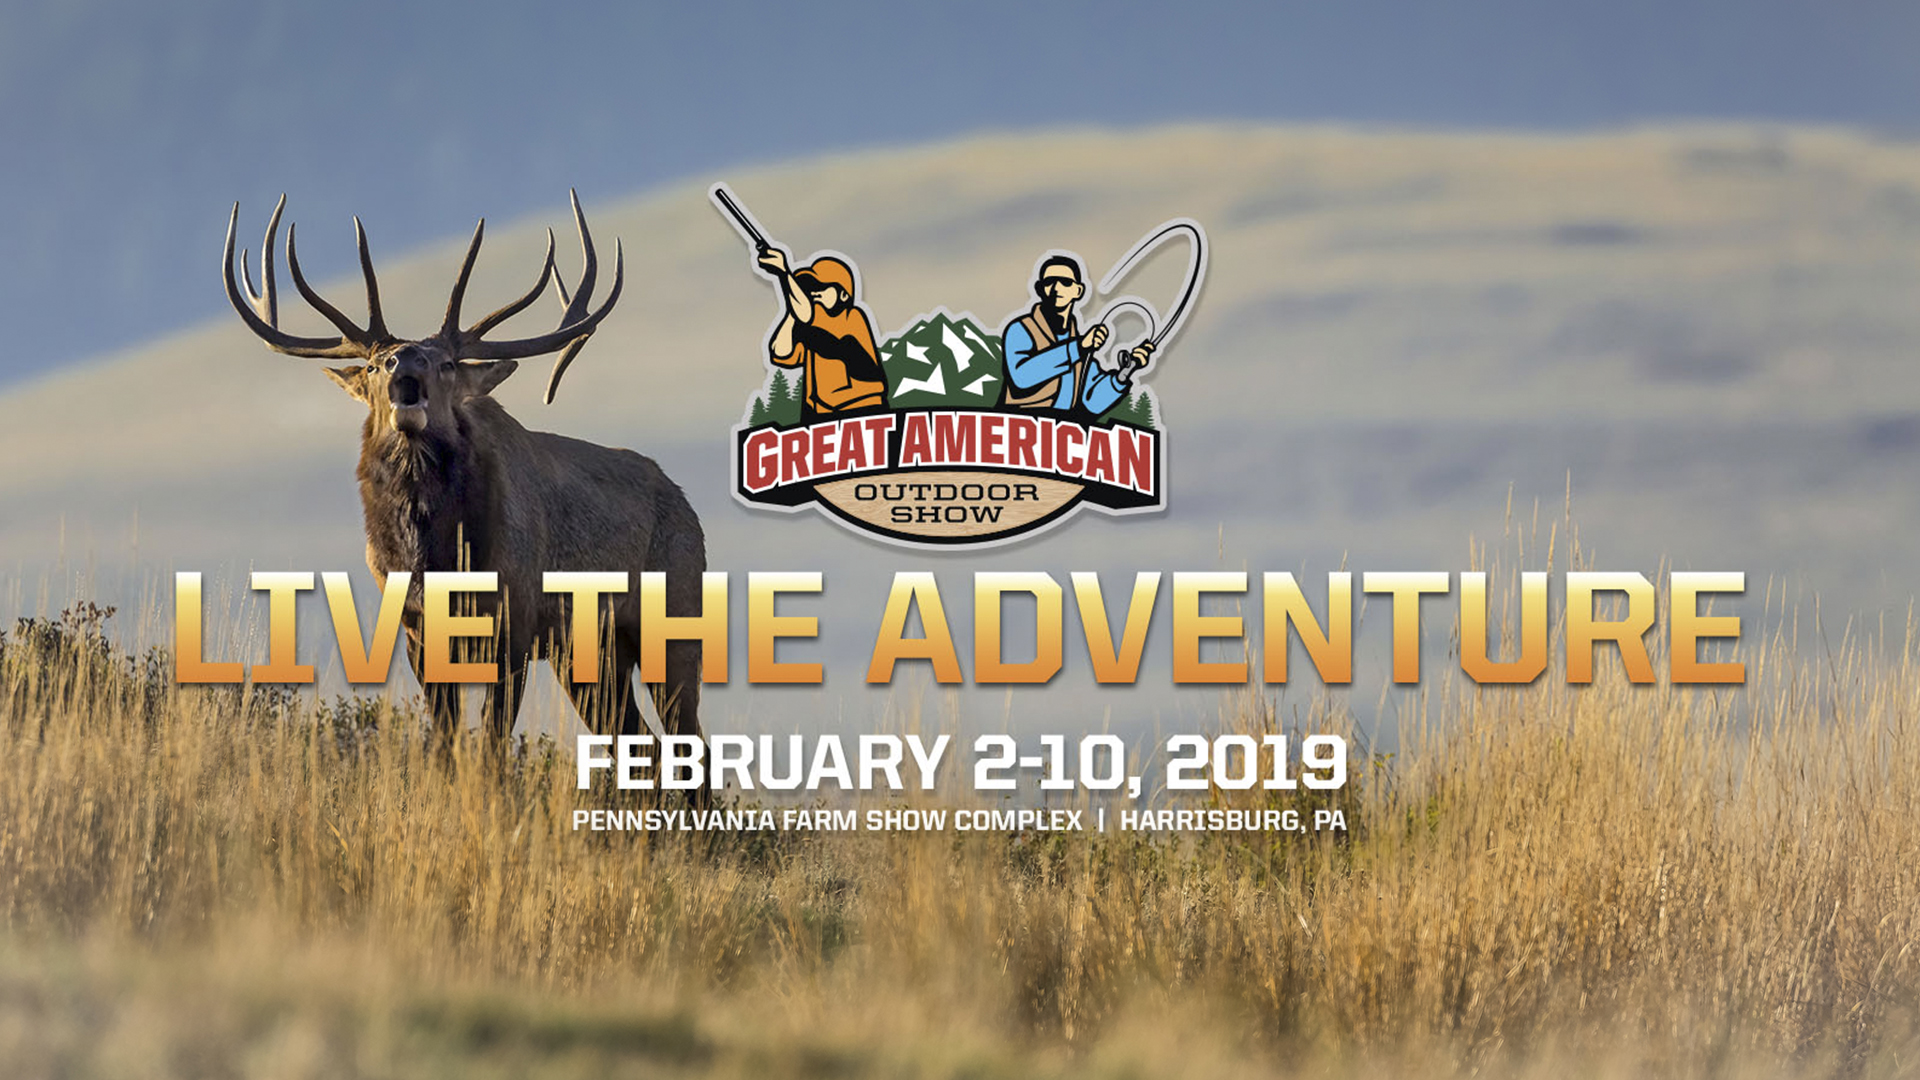 Are You Ready for This Year's Great American Outdoor Show?